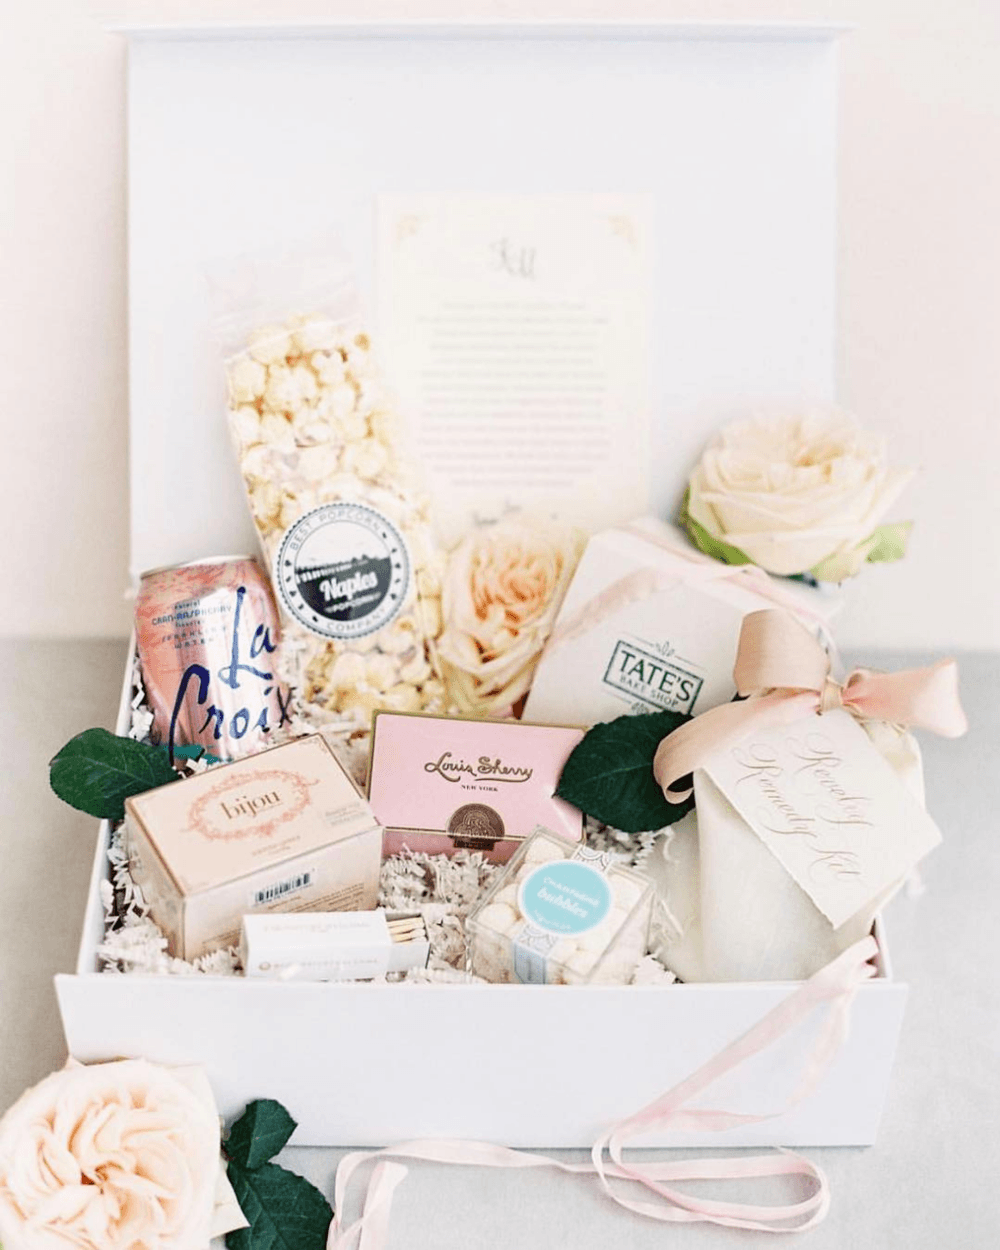 We love a good wedding DIY! Welcome bags are a great way to